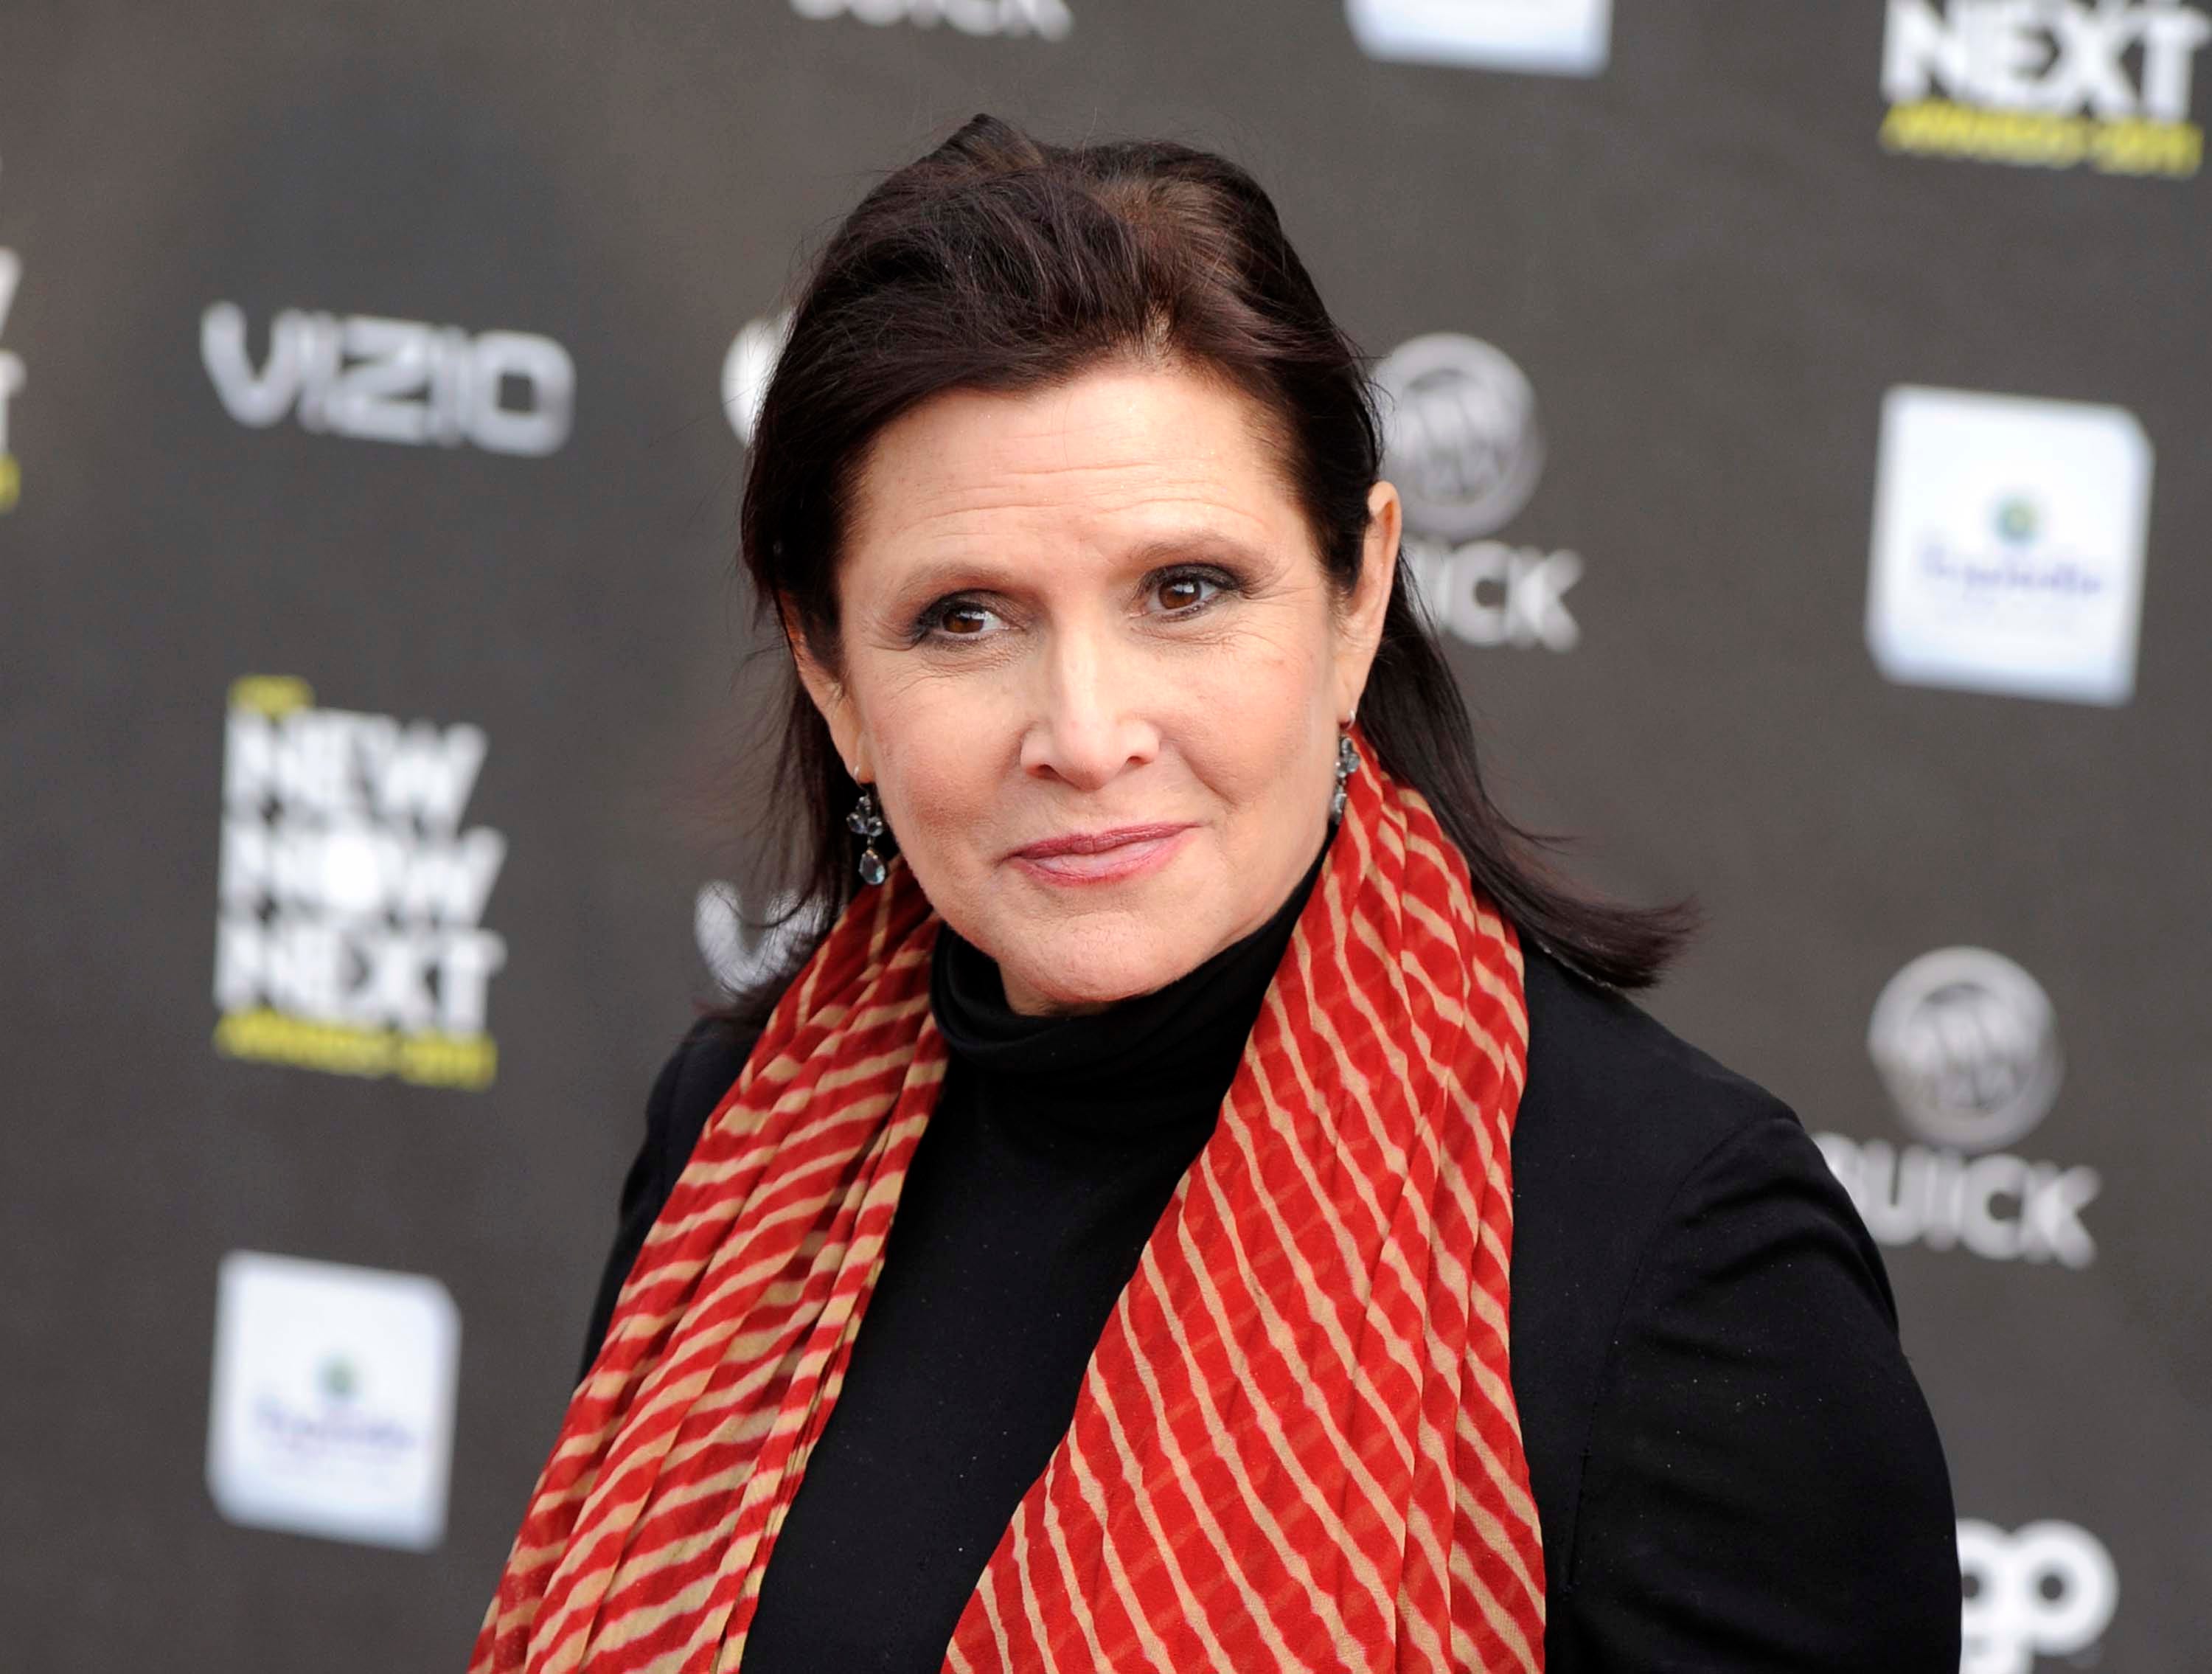 Forget the rumors: 'Star Wars' won't digitally recreate Carrie Fisher